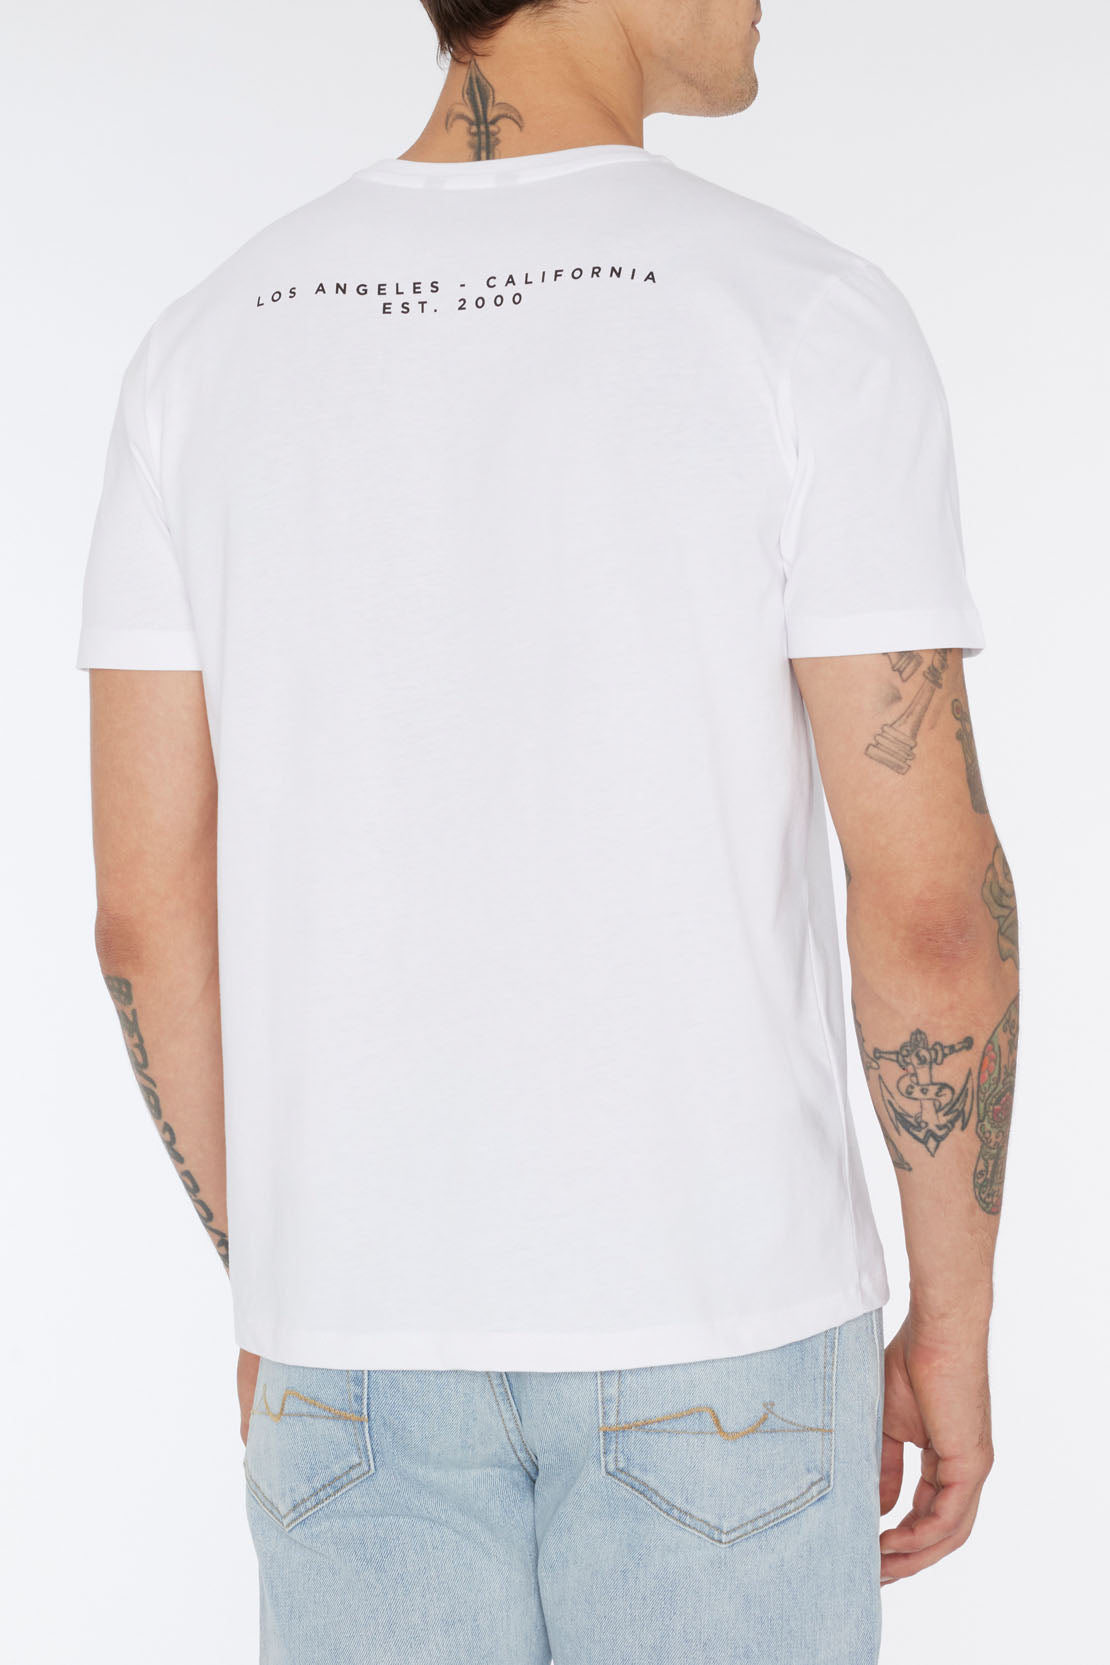 7 FOR ALL MANKIND - White Photographic T-Shirt With Surf Beach Print JSLM332GWS